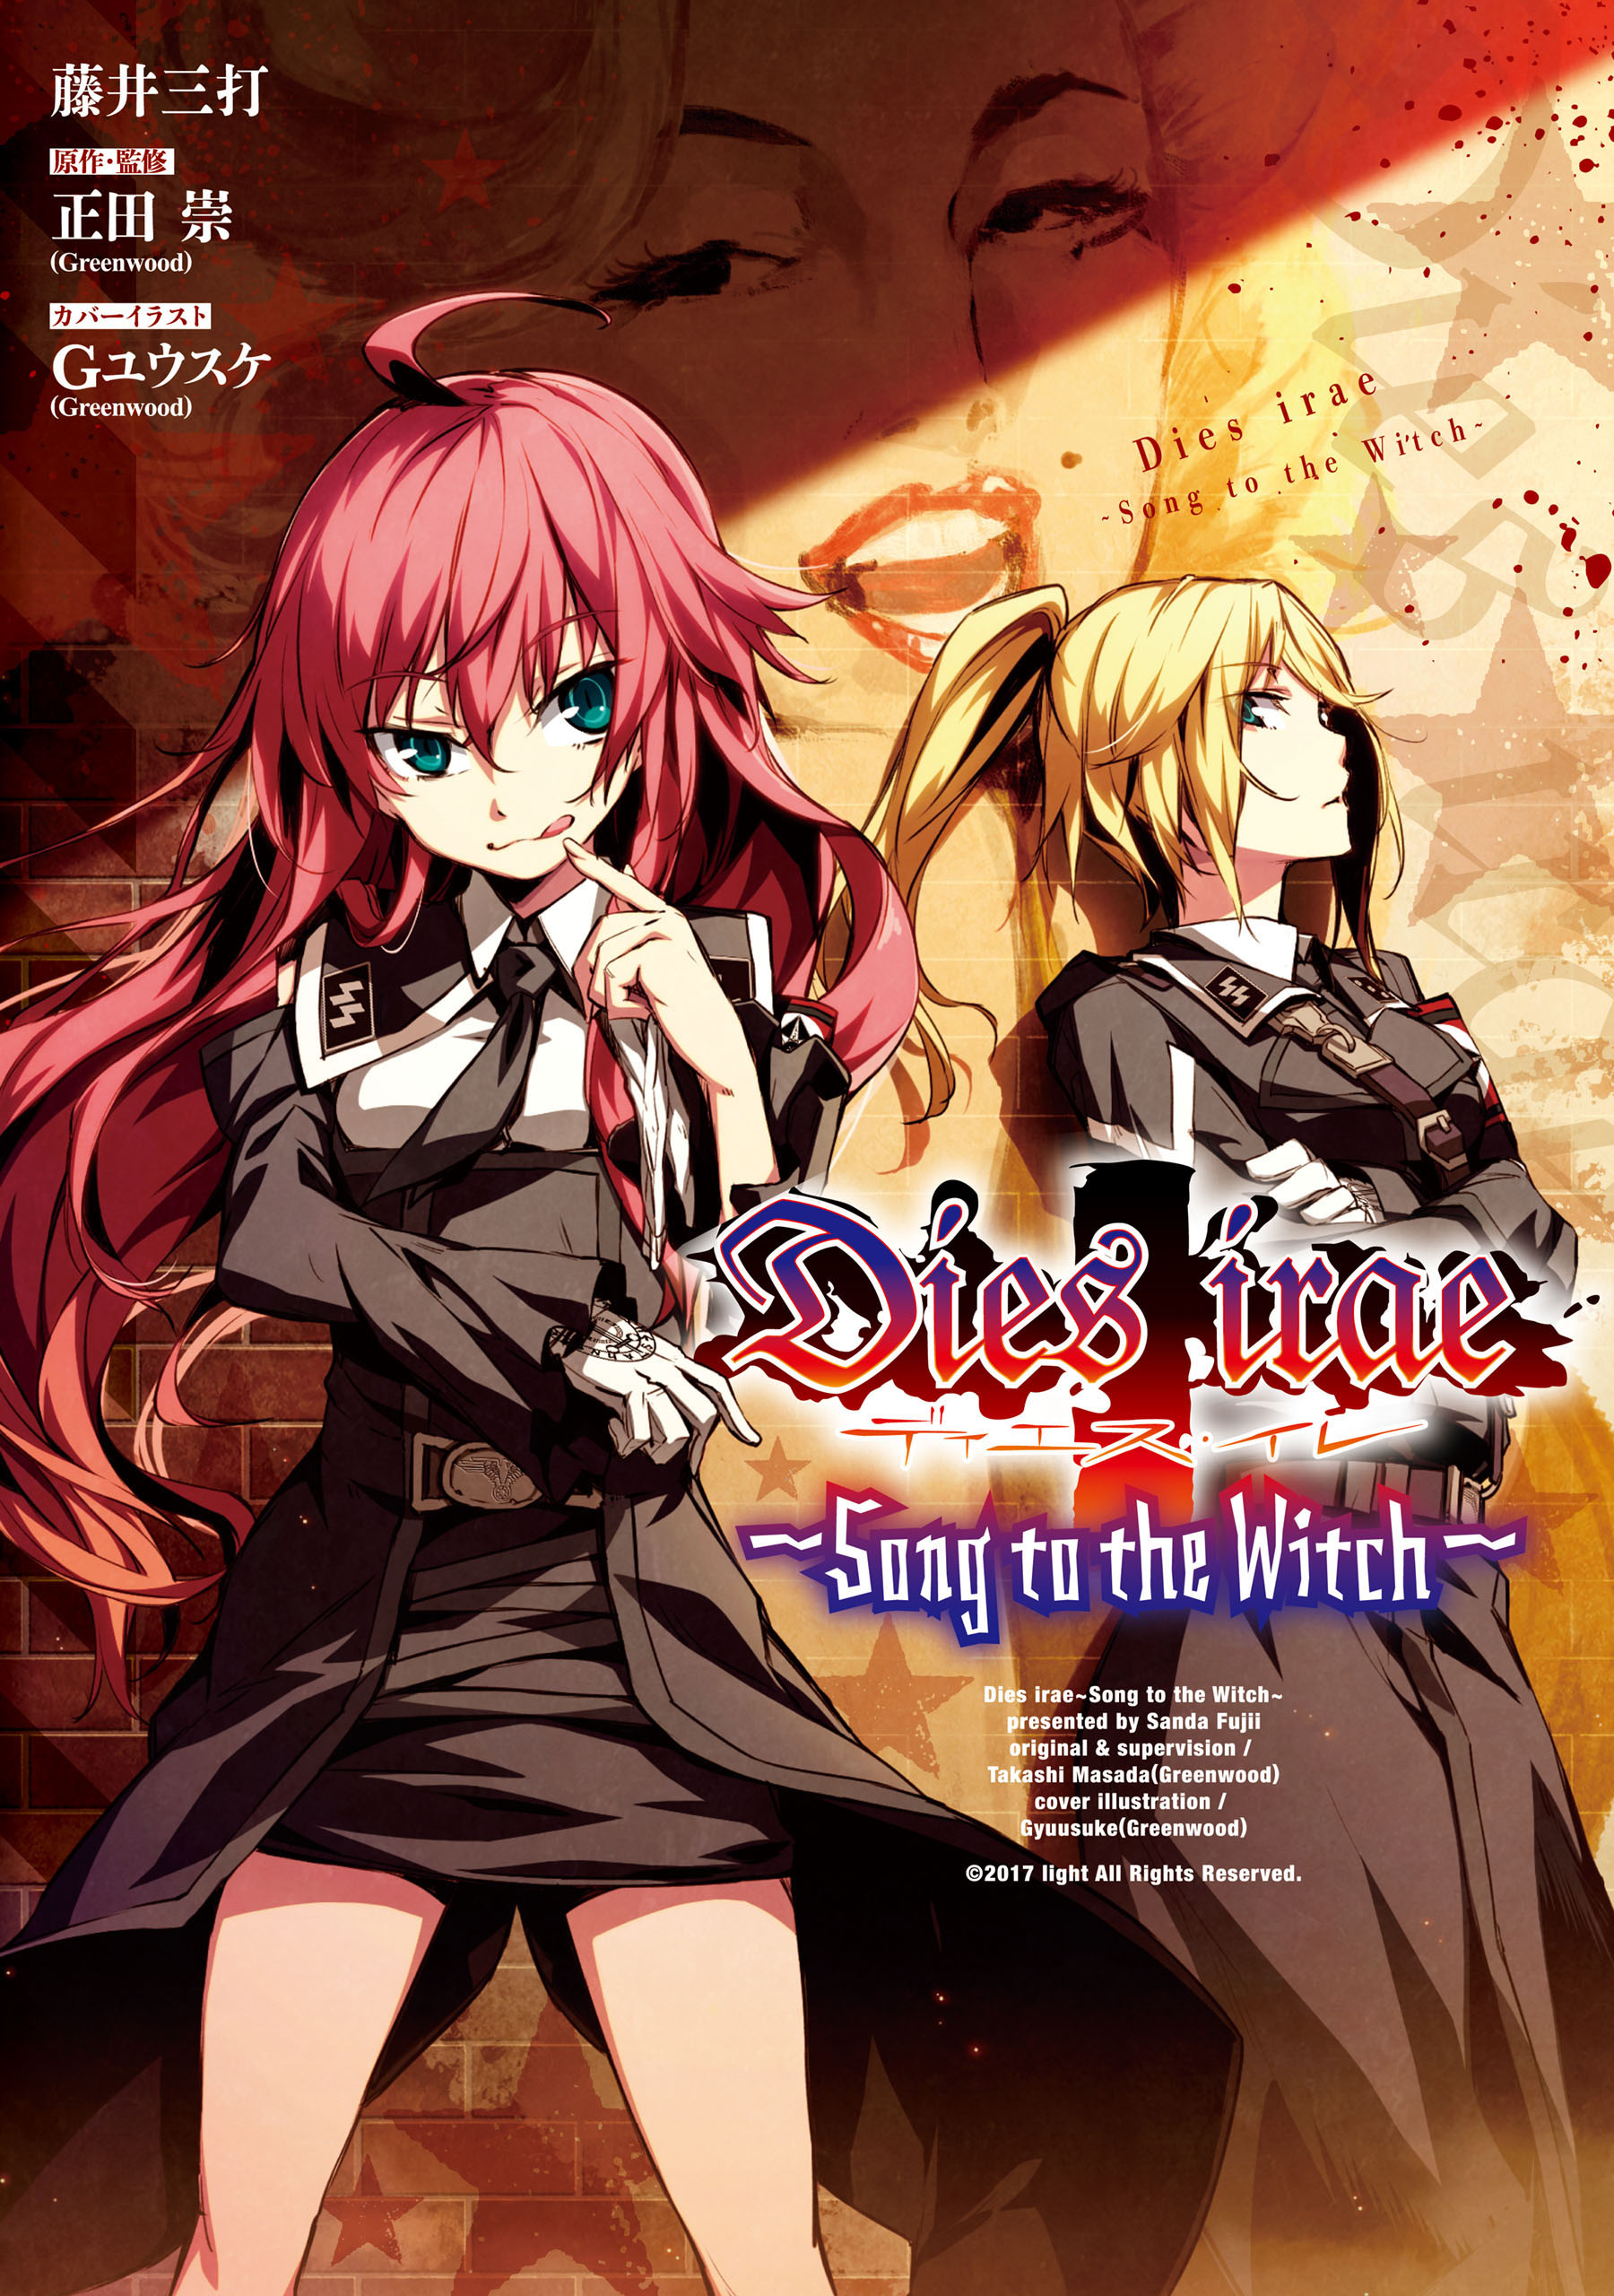 Dies irae ～Song to the Witch～ - 藤井三打/Gユウスケ（Greenwood 